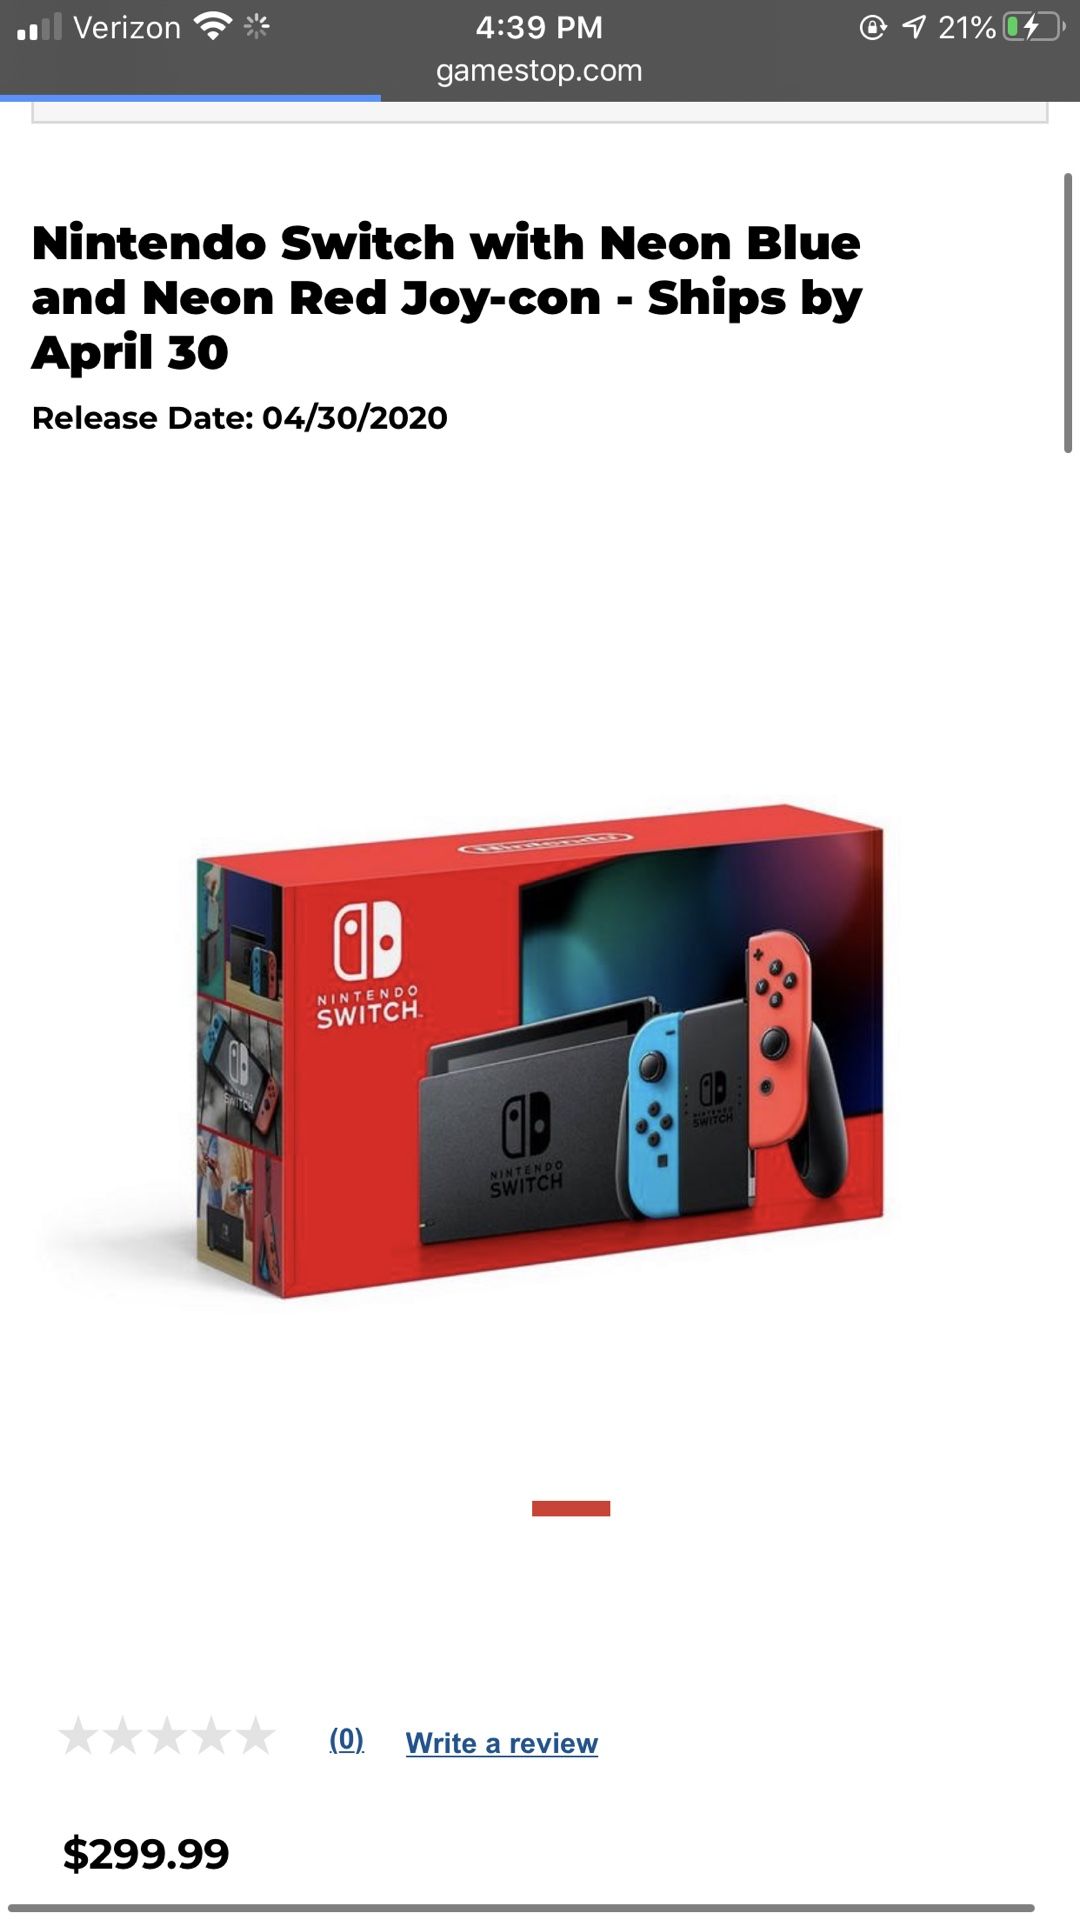 Nintendo Switch with Neon Blue and Neon Red Joy-con